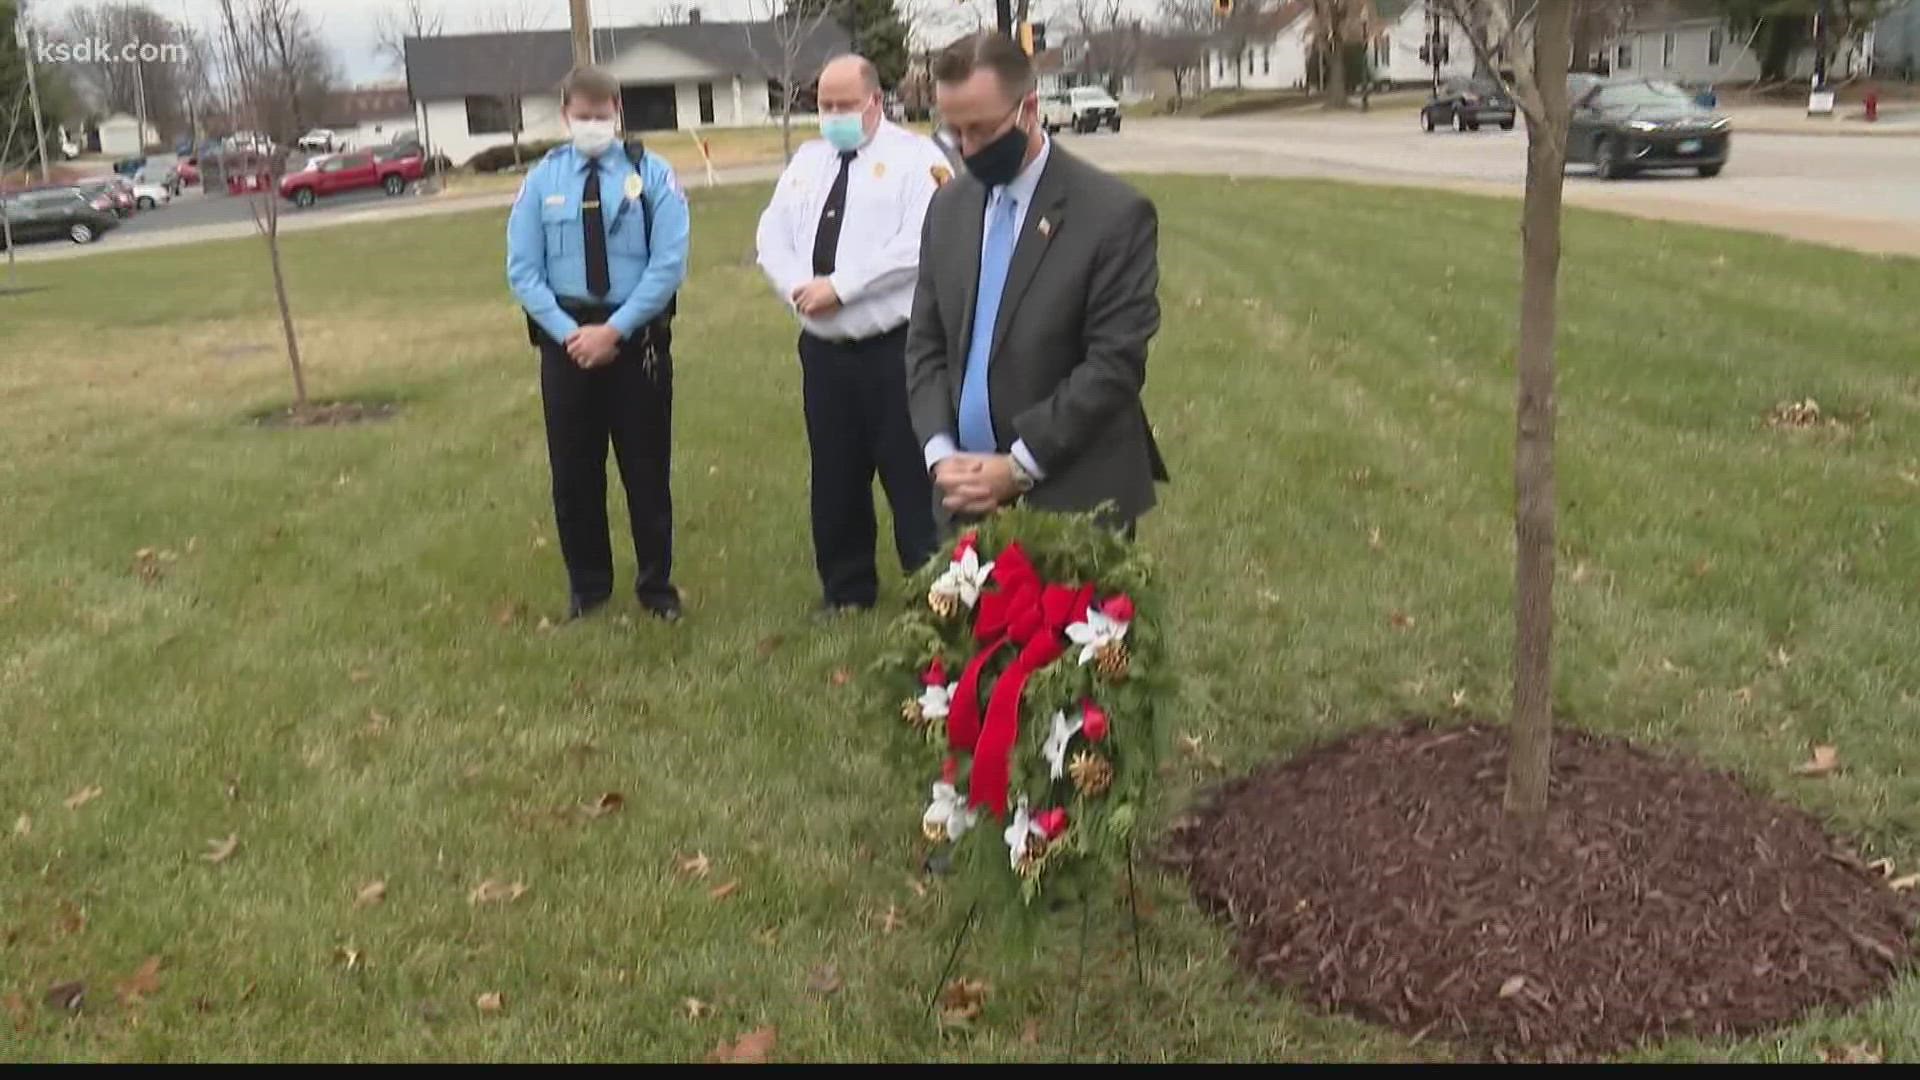 A ceremony was held at the public safety building Friday morning.